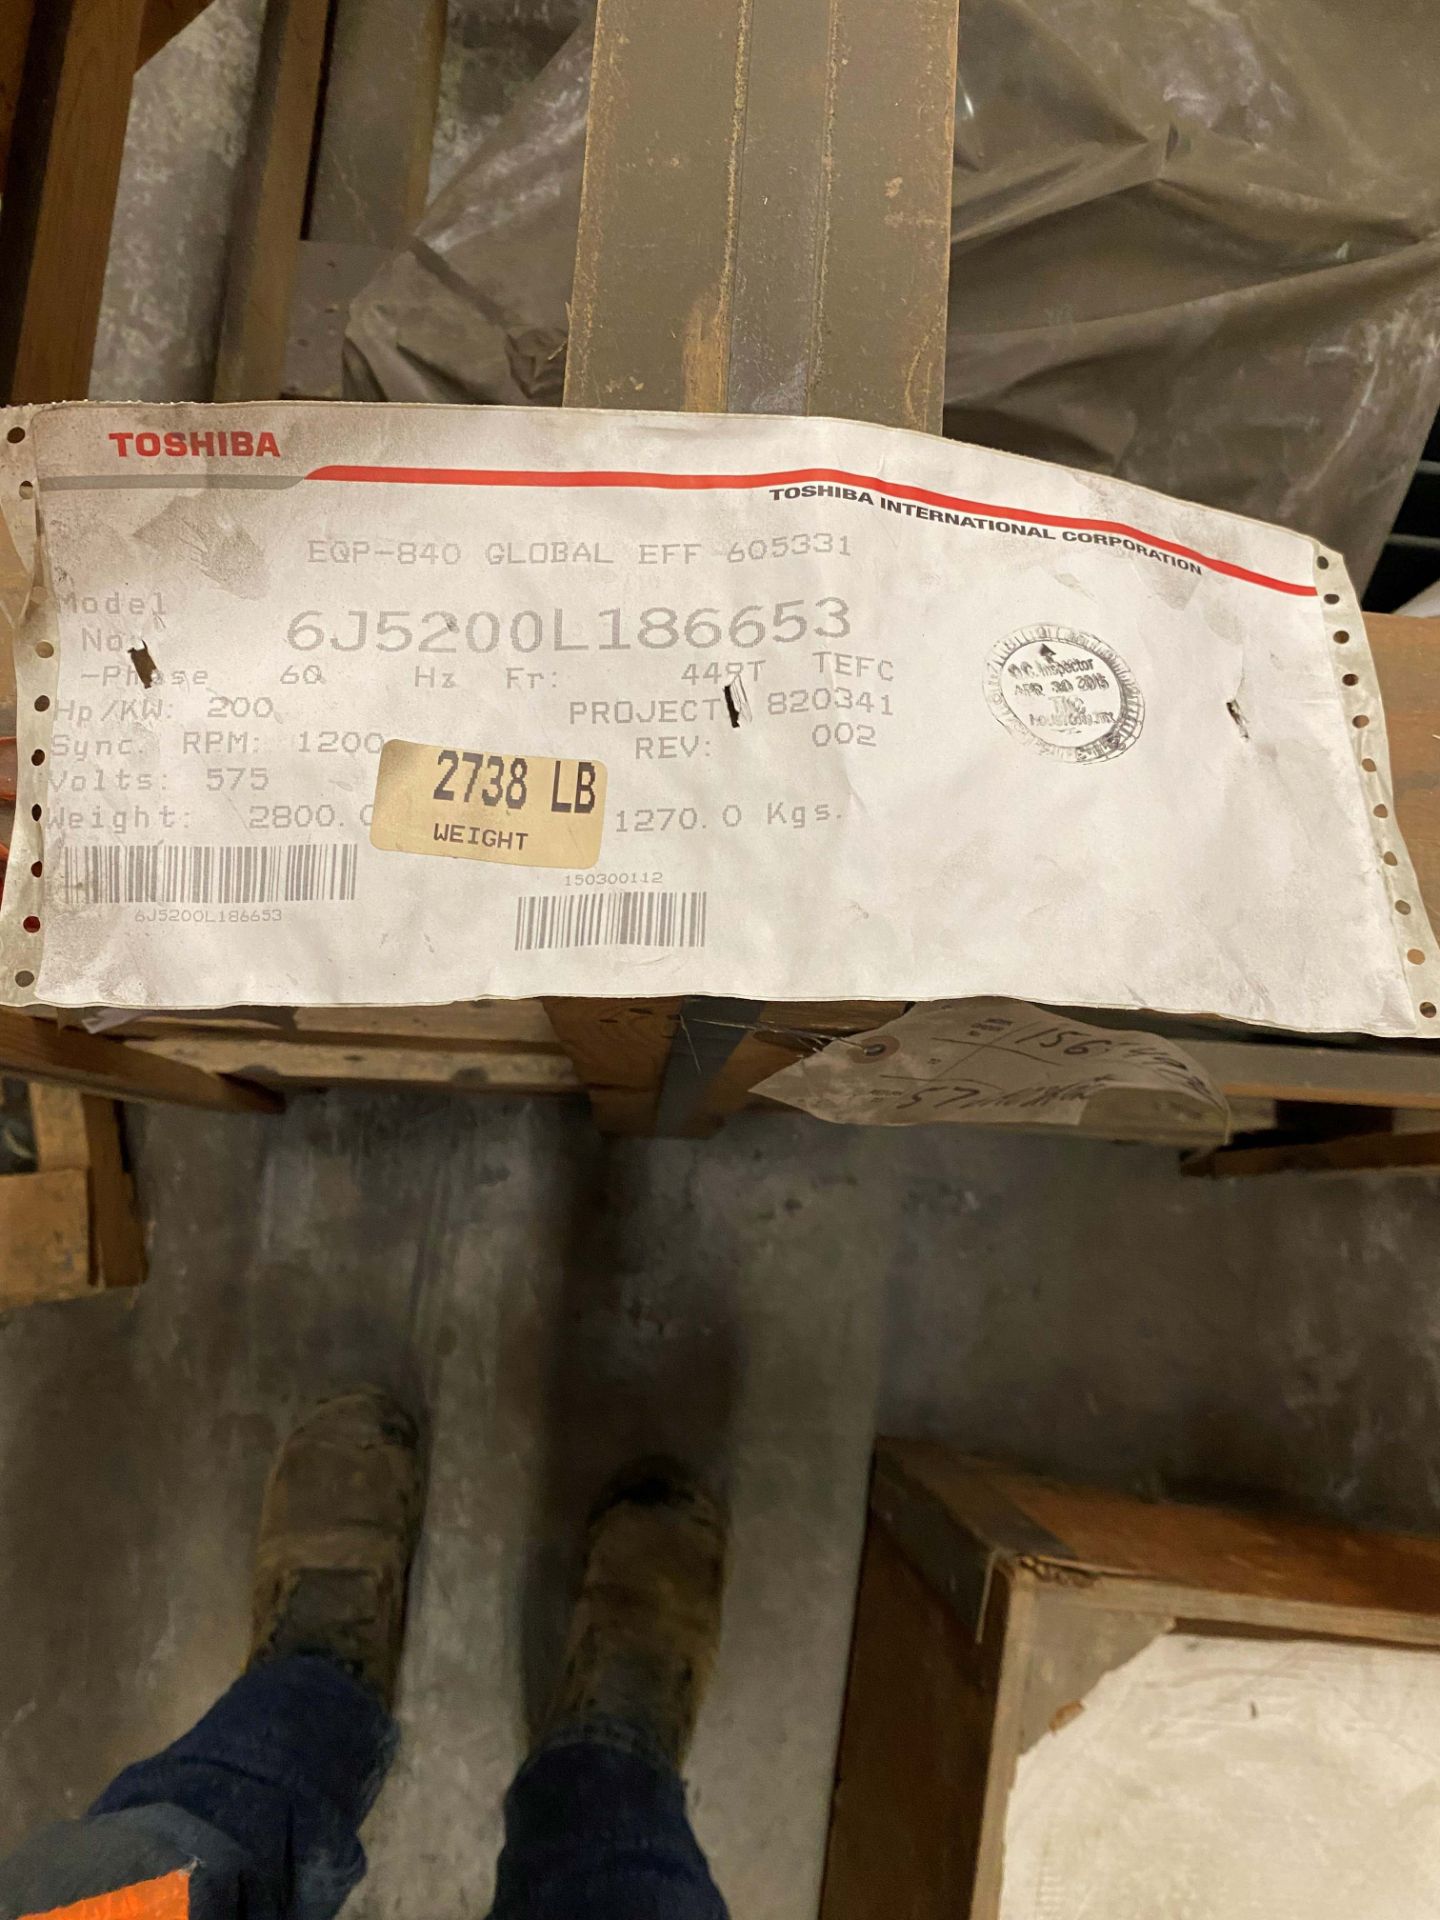 TOSHIBA 200 HP MOTOR, 575V/3PH/60HZ, S/N 150300112 (LOCATED IN THOMPSON, MB) - Image 2 of 3